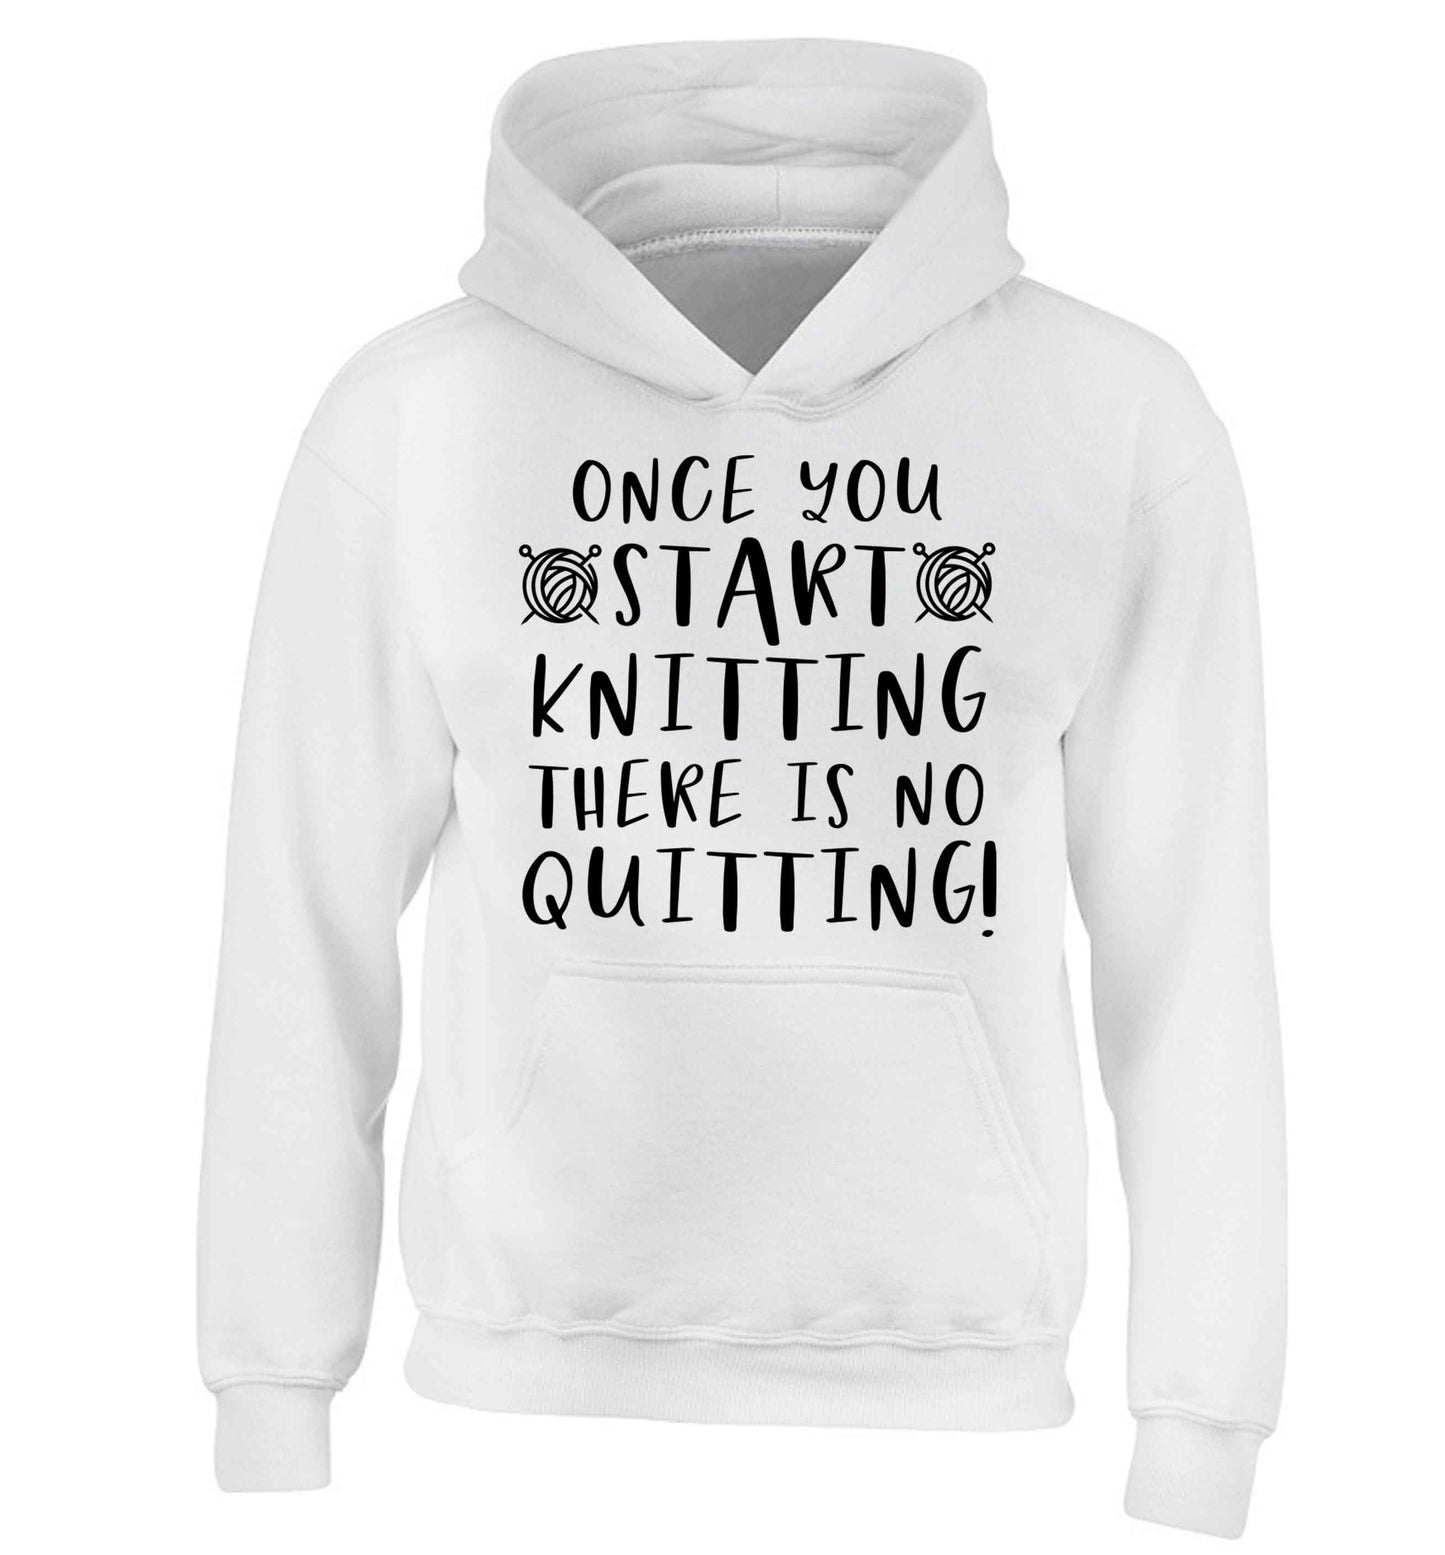 Once you start knitting there is no quitting! children's white hoodie 12-13 Years